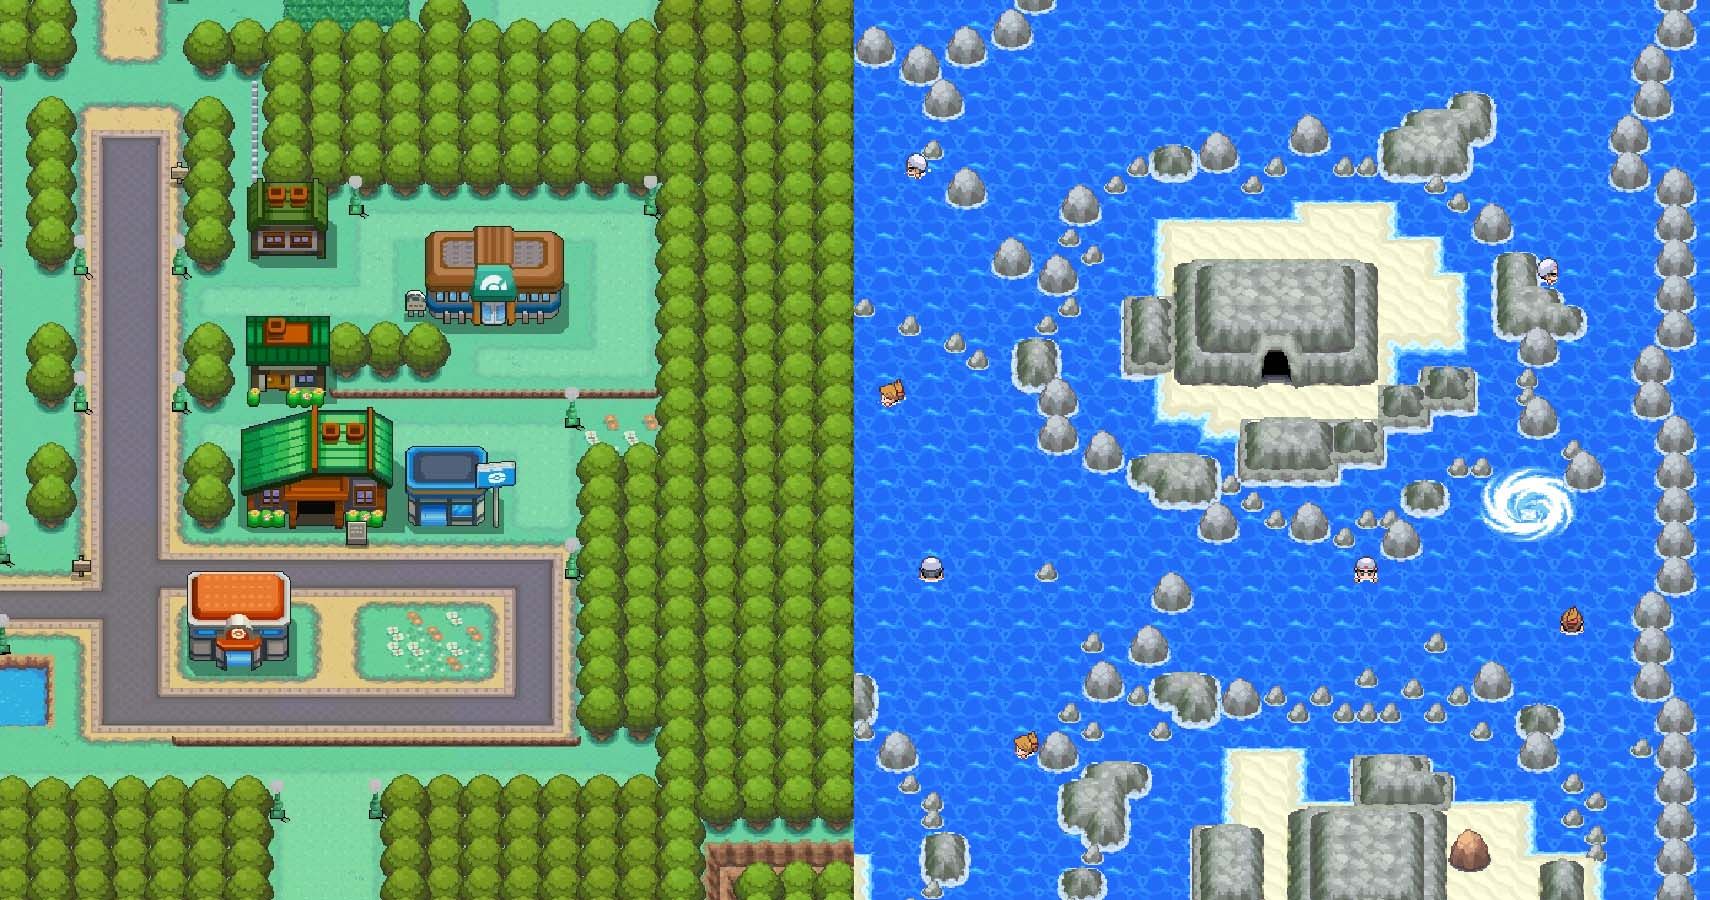 Pokémon: 10 Areas In The Johto Region You Didn't Know Existed